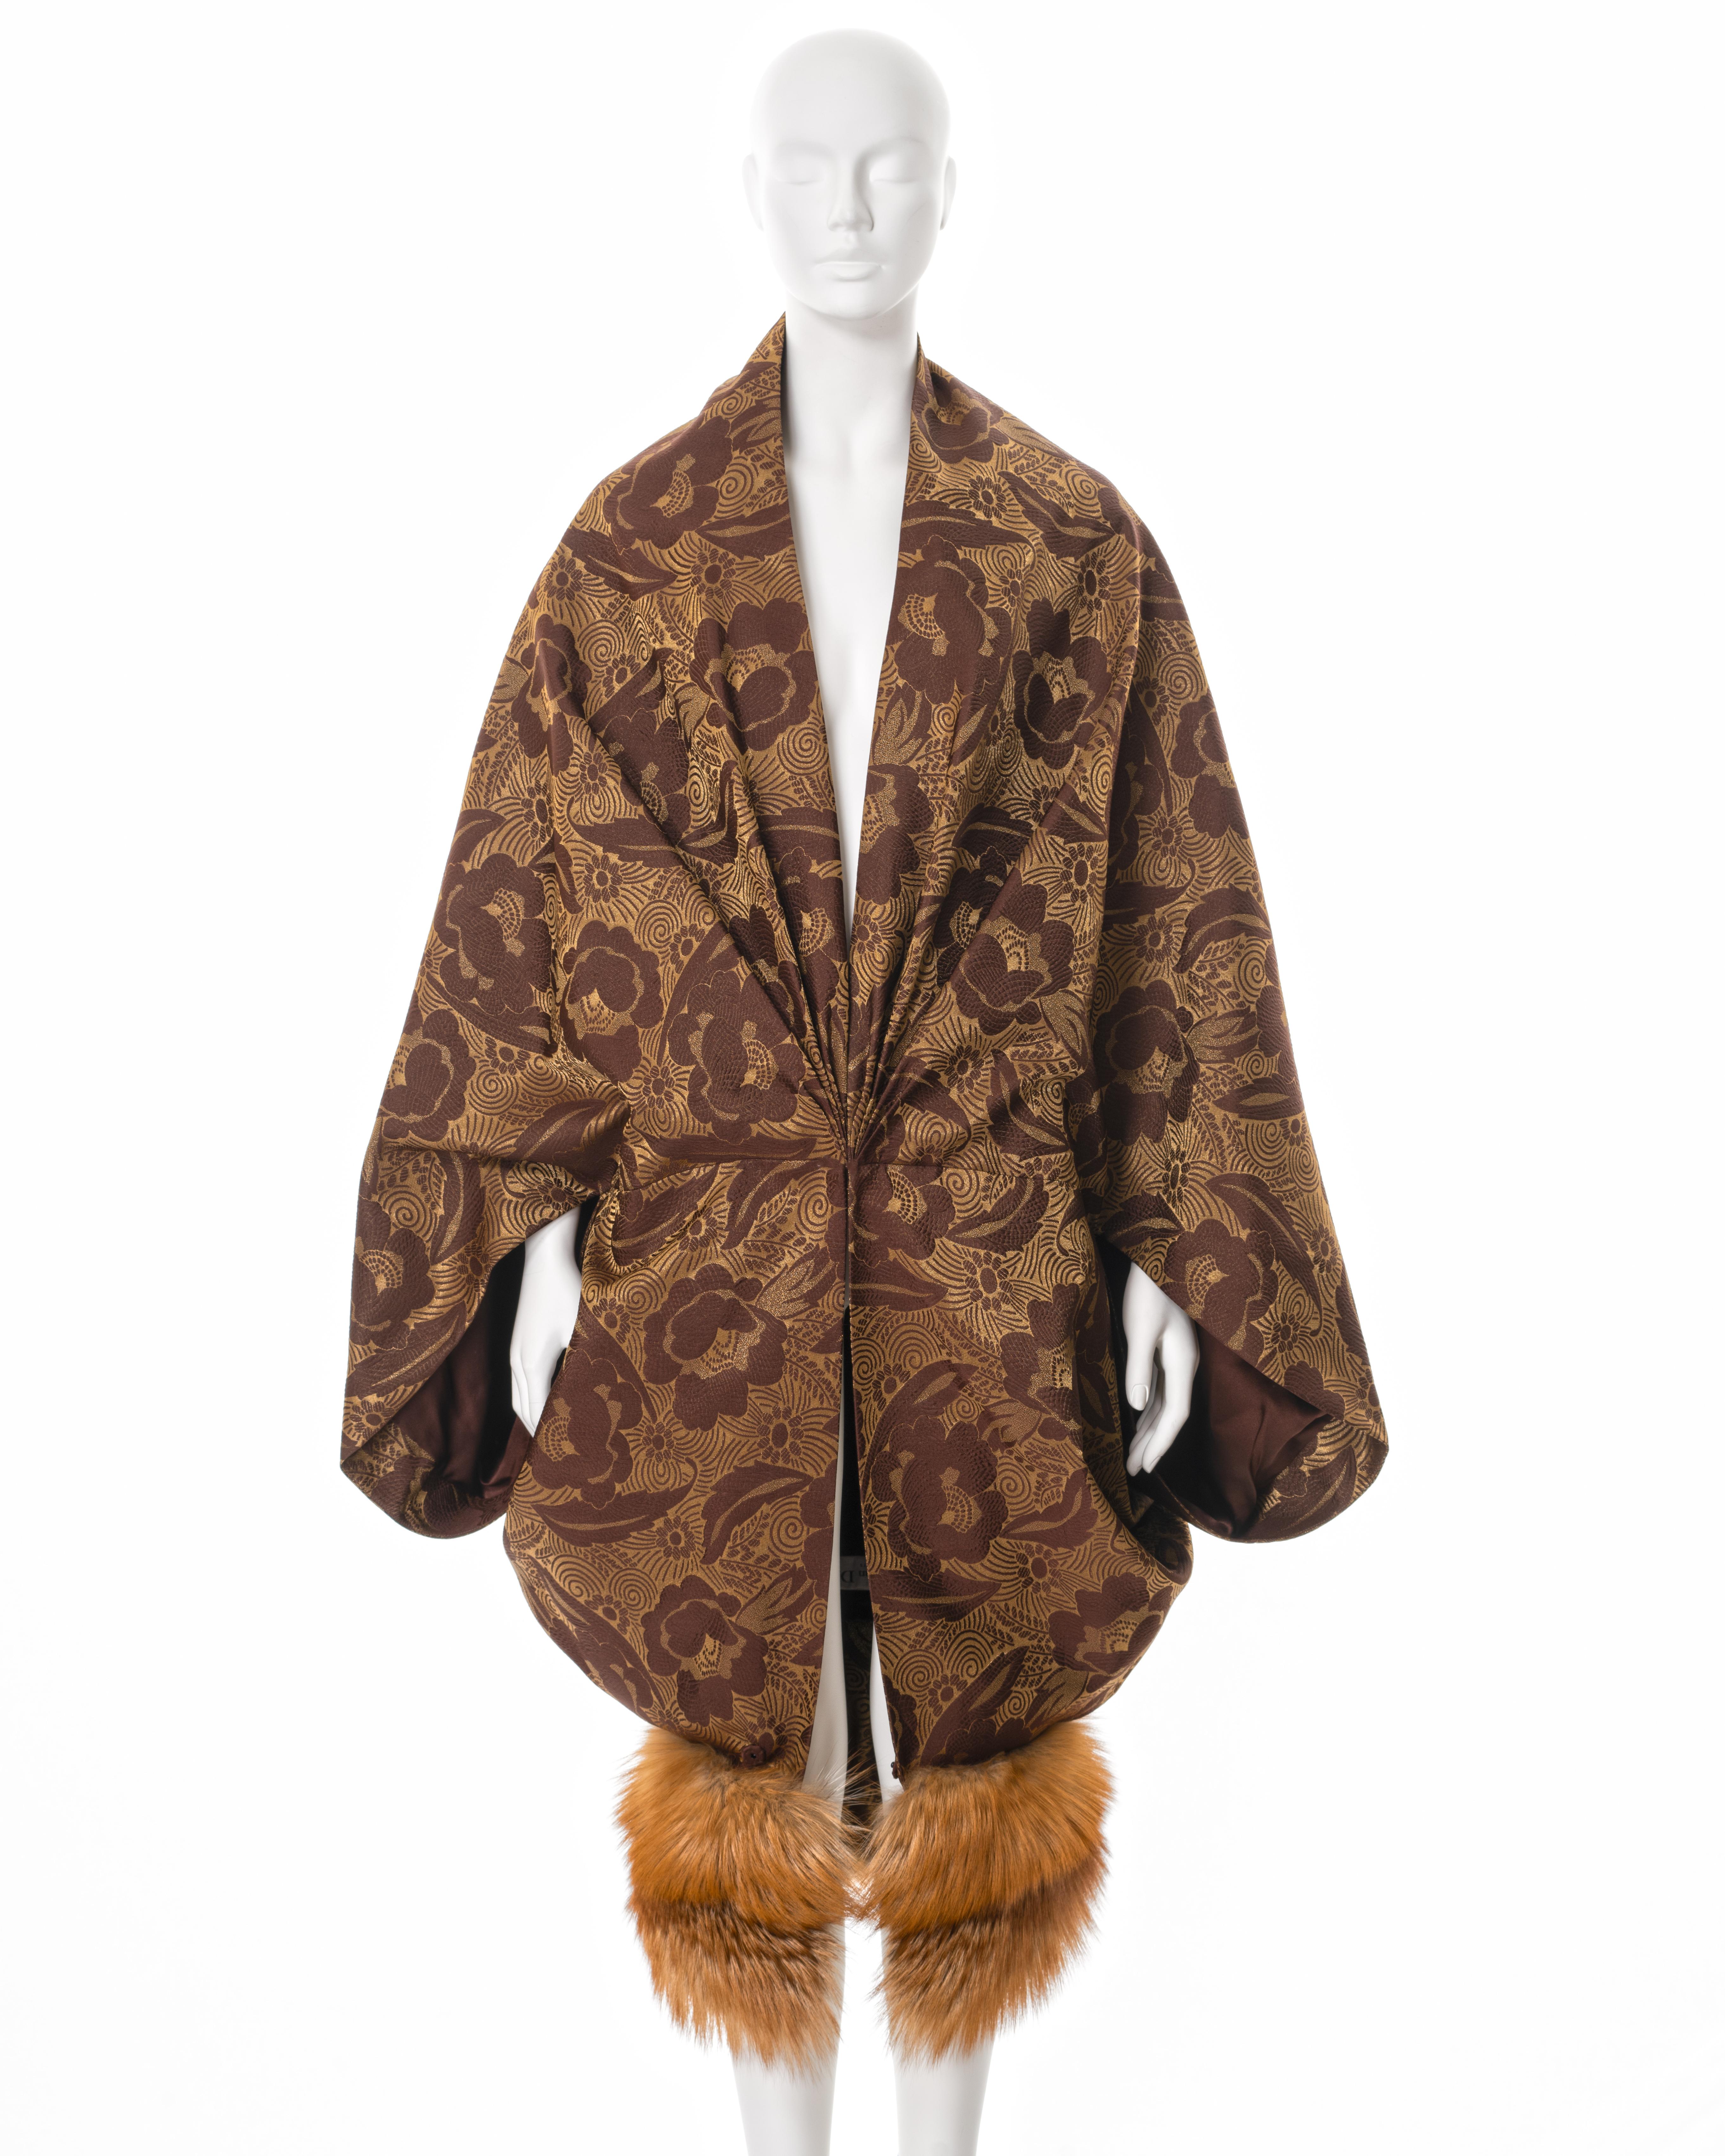 Christian Dior by John Galliano silk cocoon coat with fox fur collar, ss 2008 For Sale 6